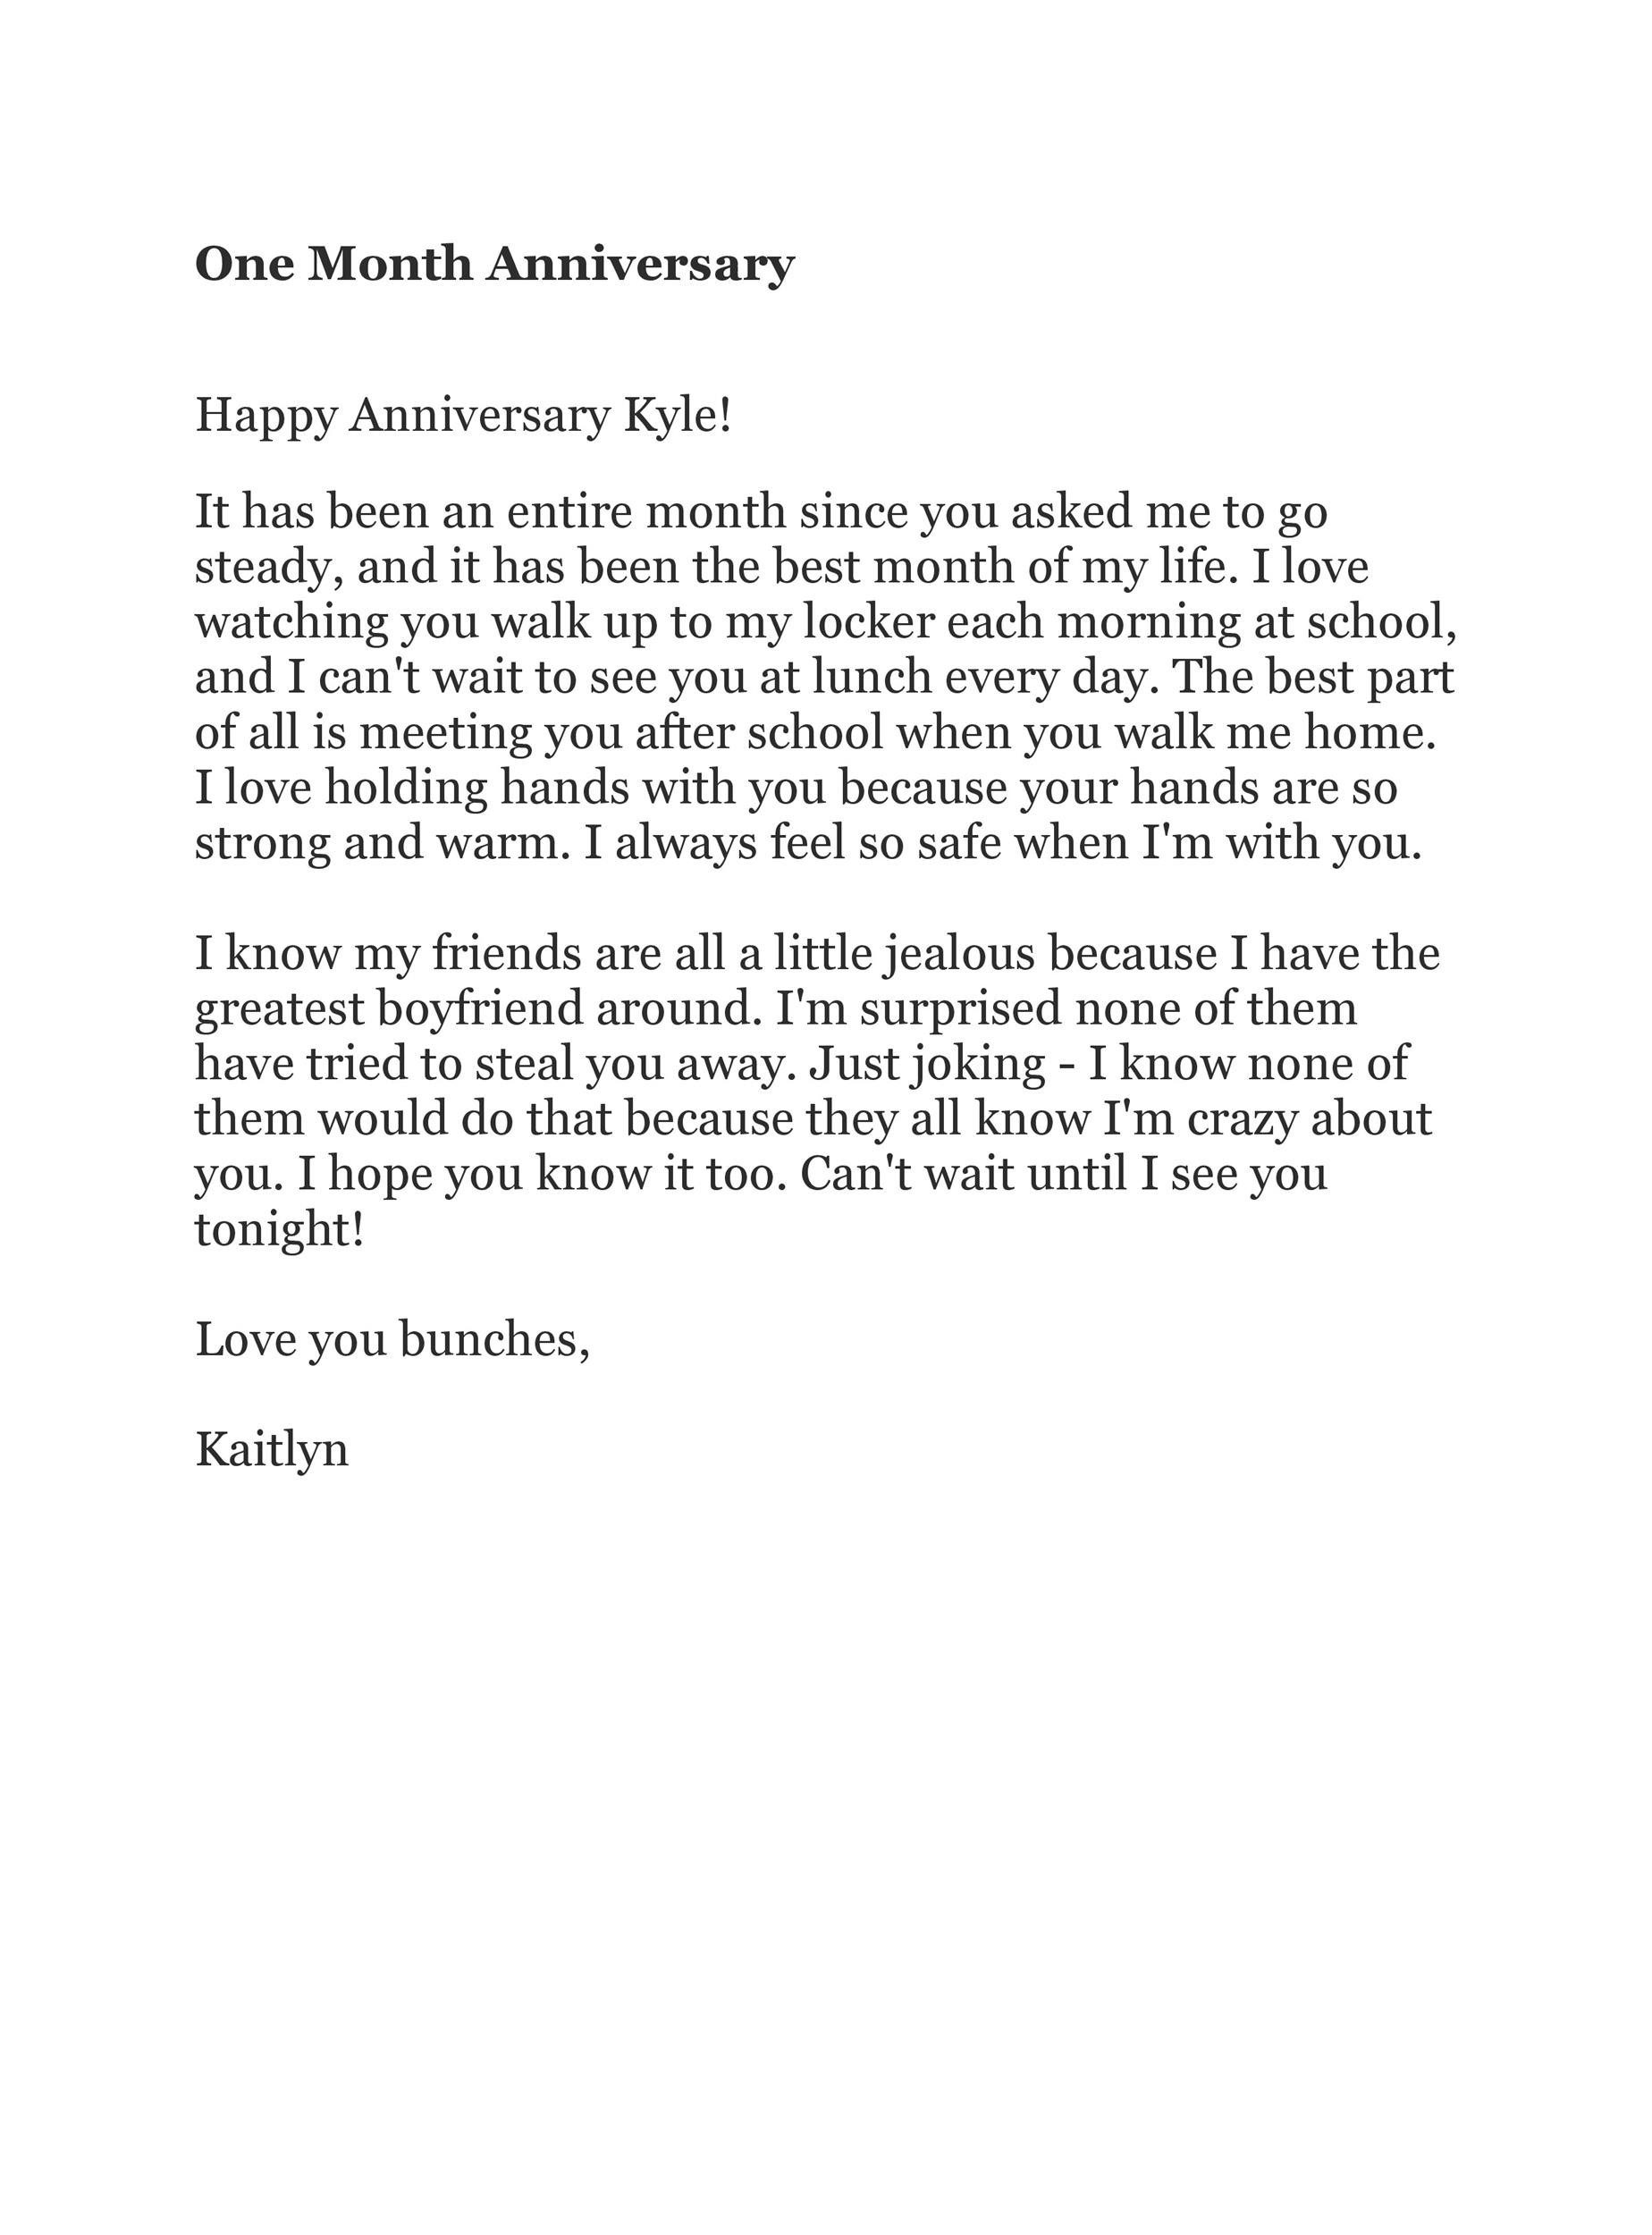 Happy 10 Month Anniversary Letter from templatelab.com